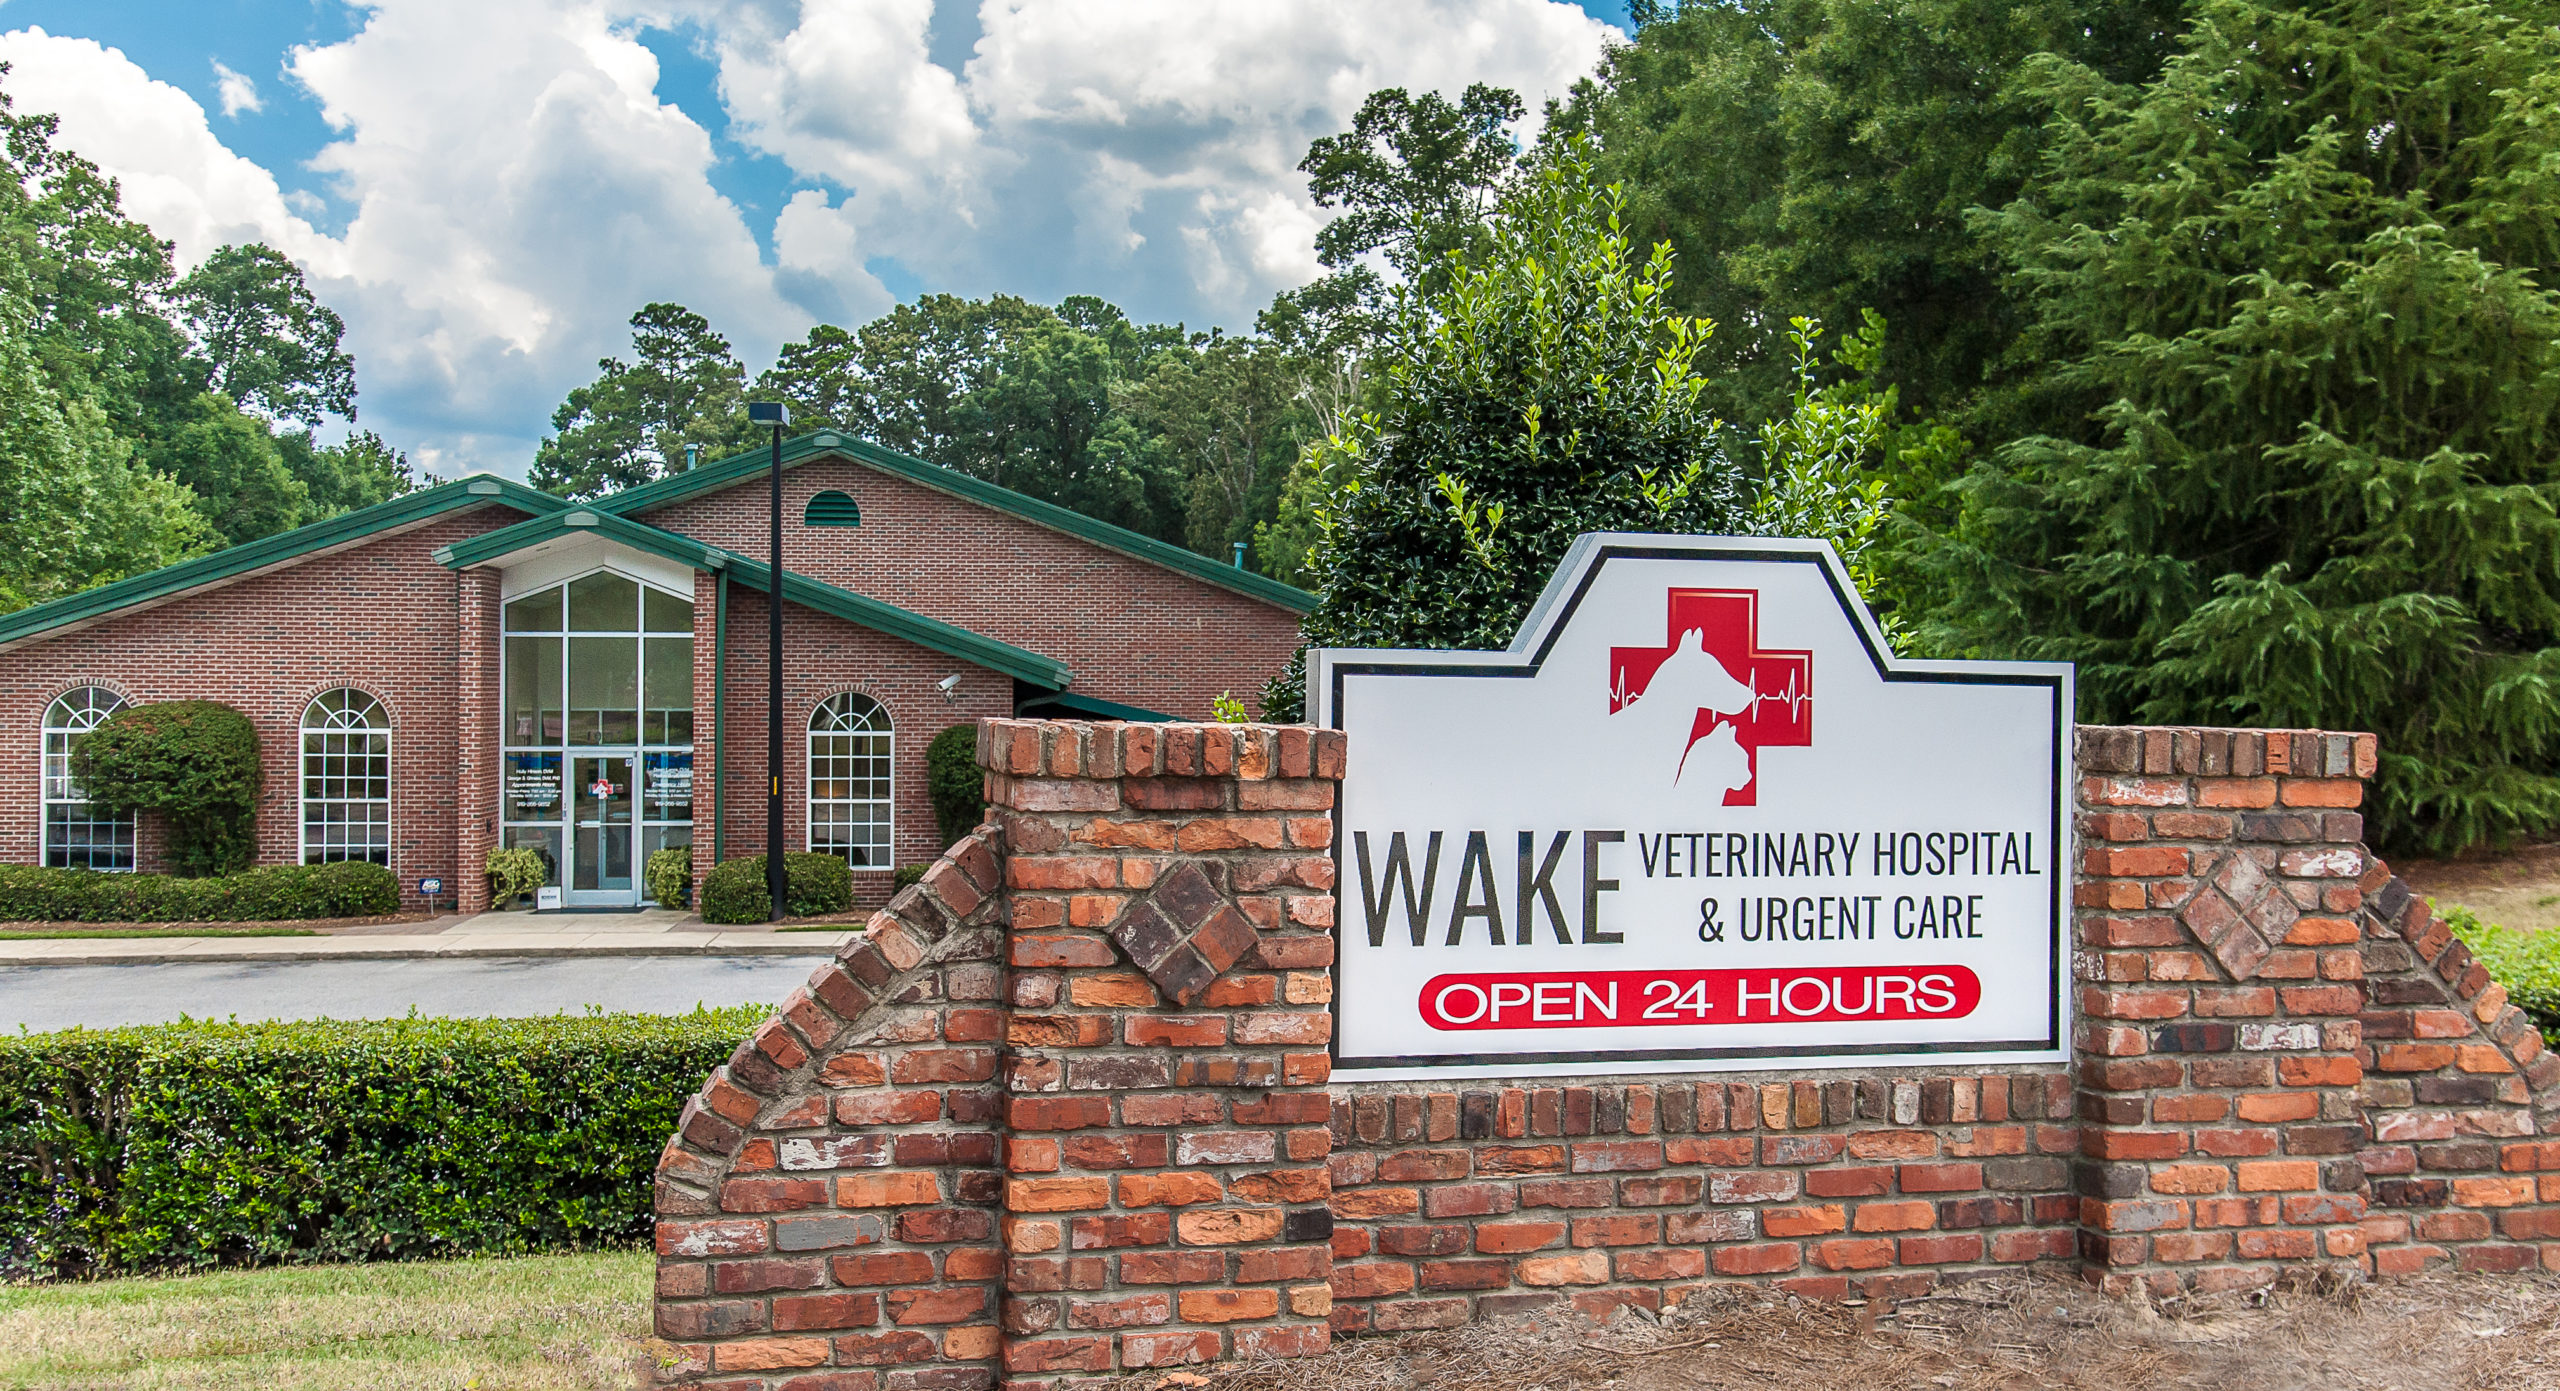 Our Practice - Wake Veterinary Hospital & Urgent Care